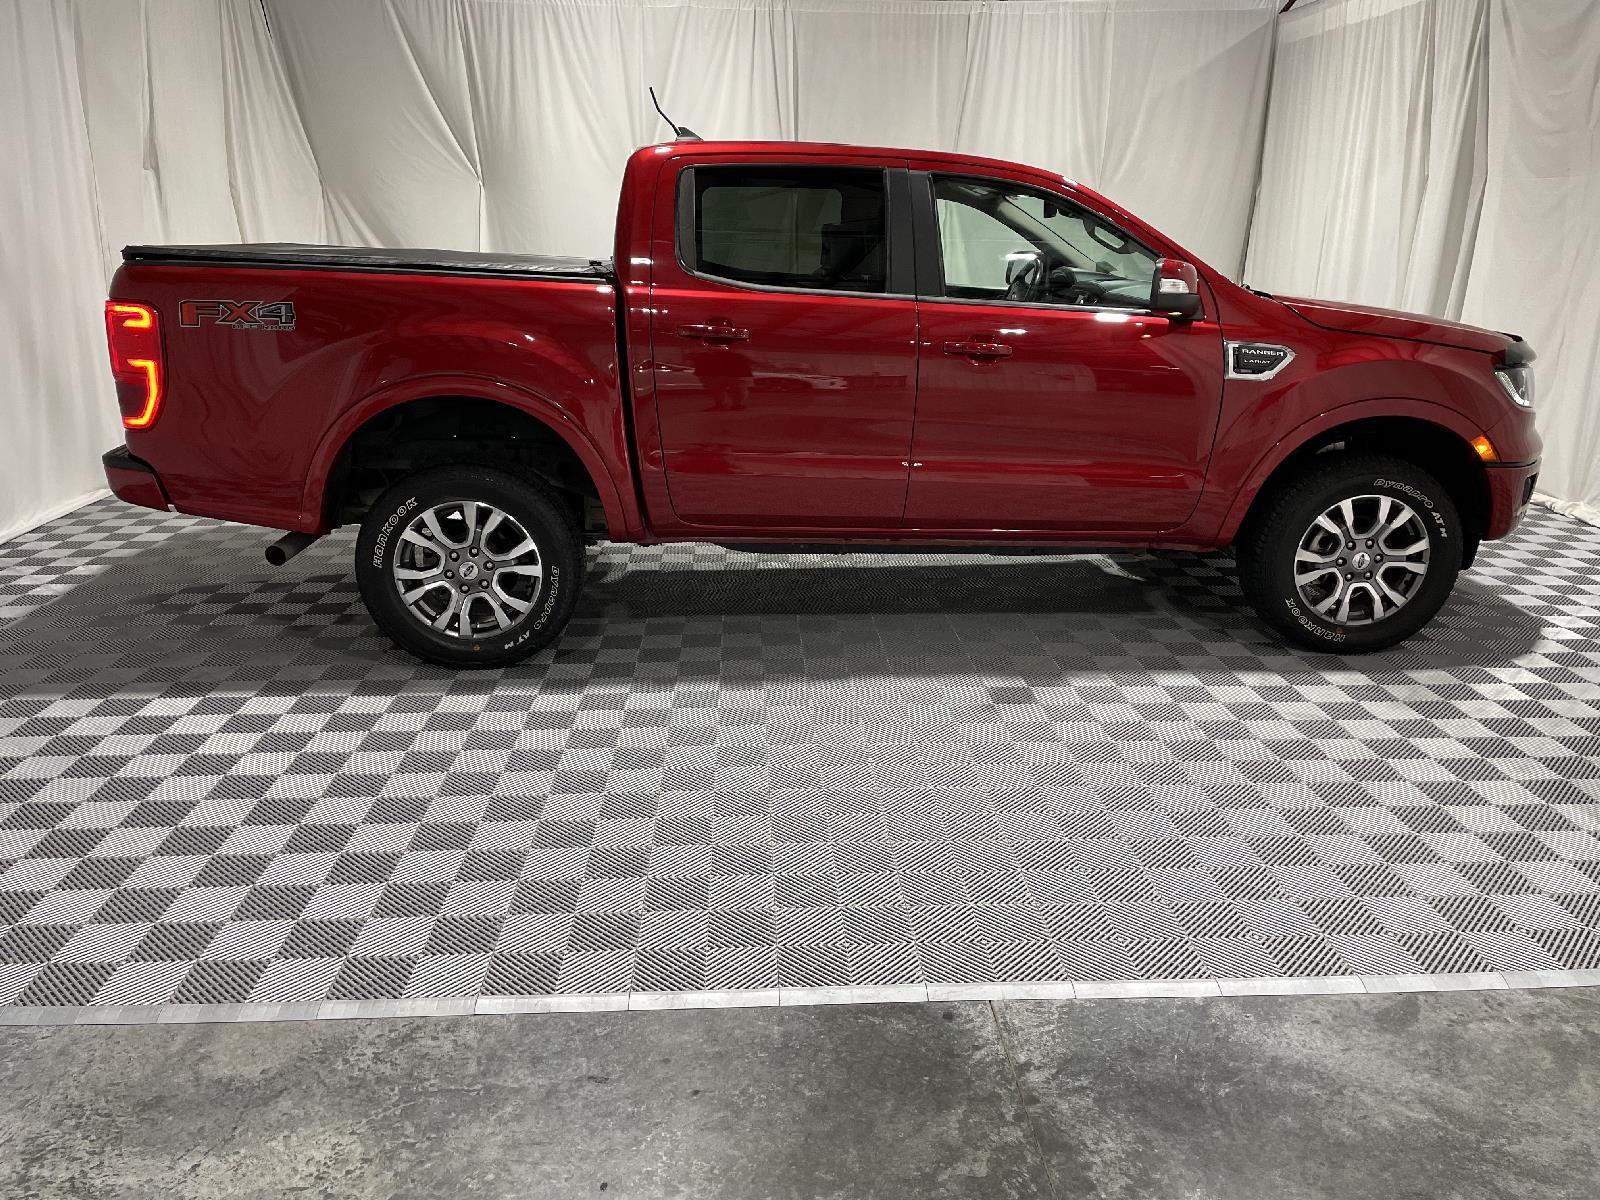 Used 2020 Ford Ranger Lariat Crew Cab Truck for sale in St Joseph MO